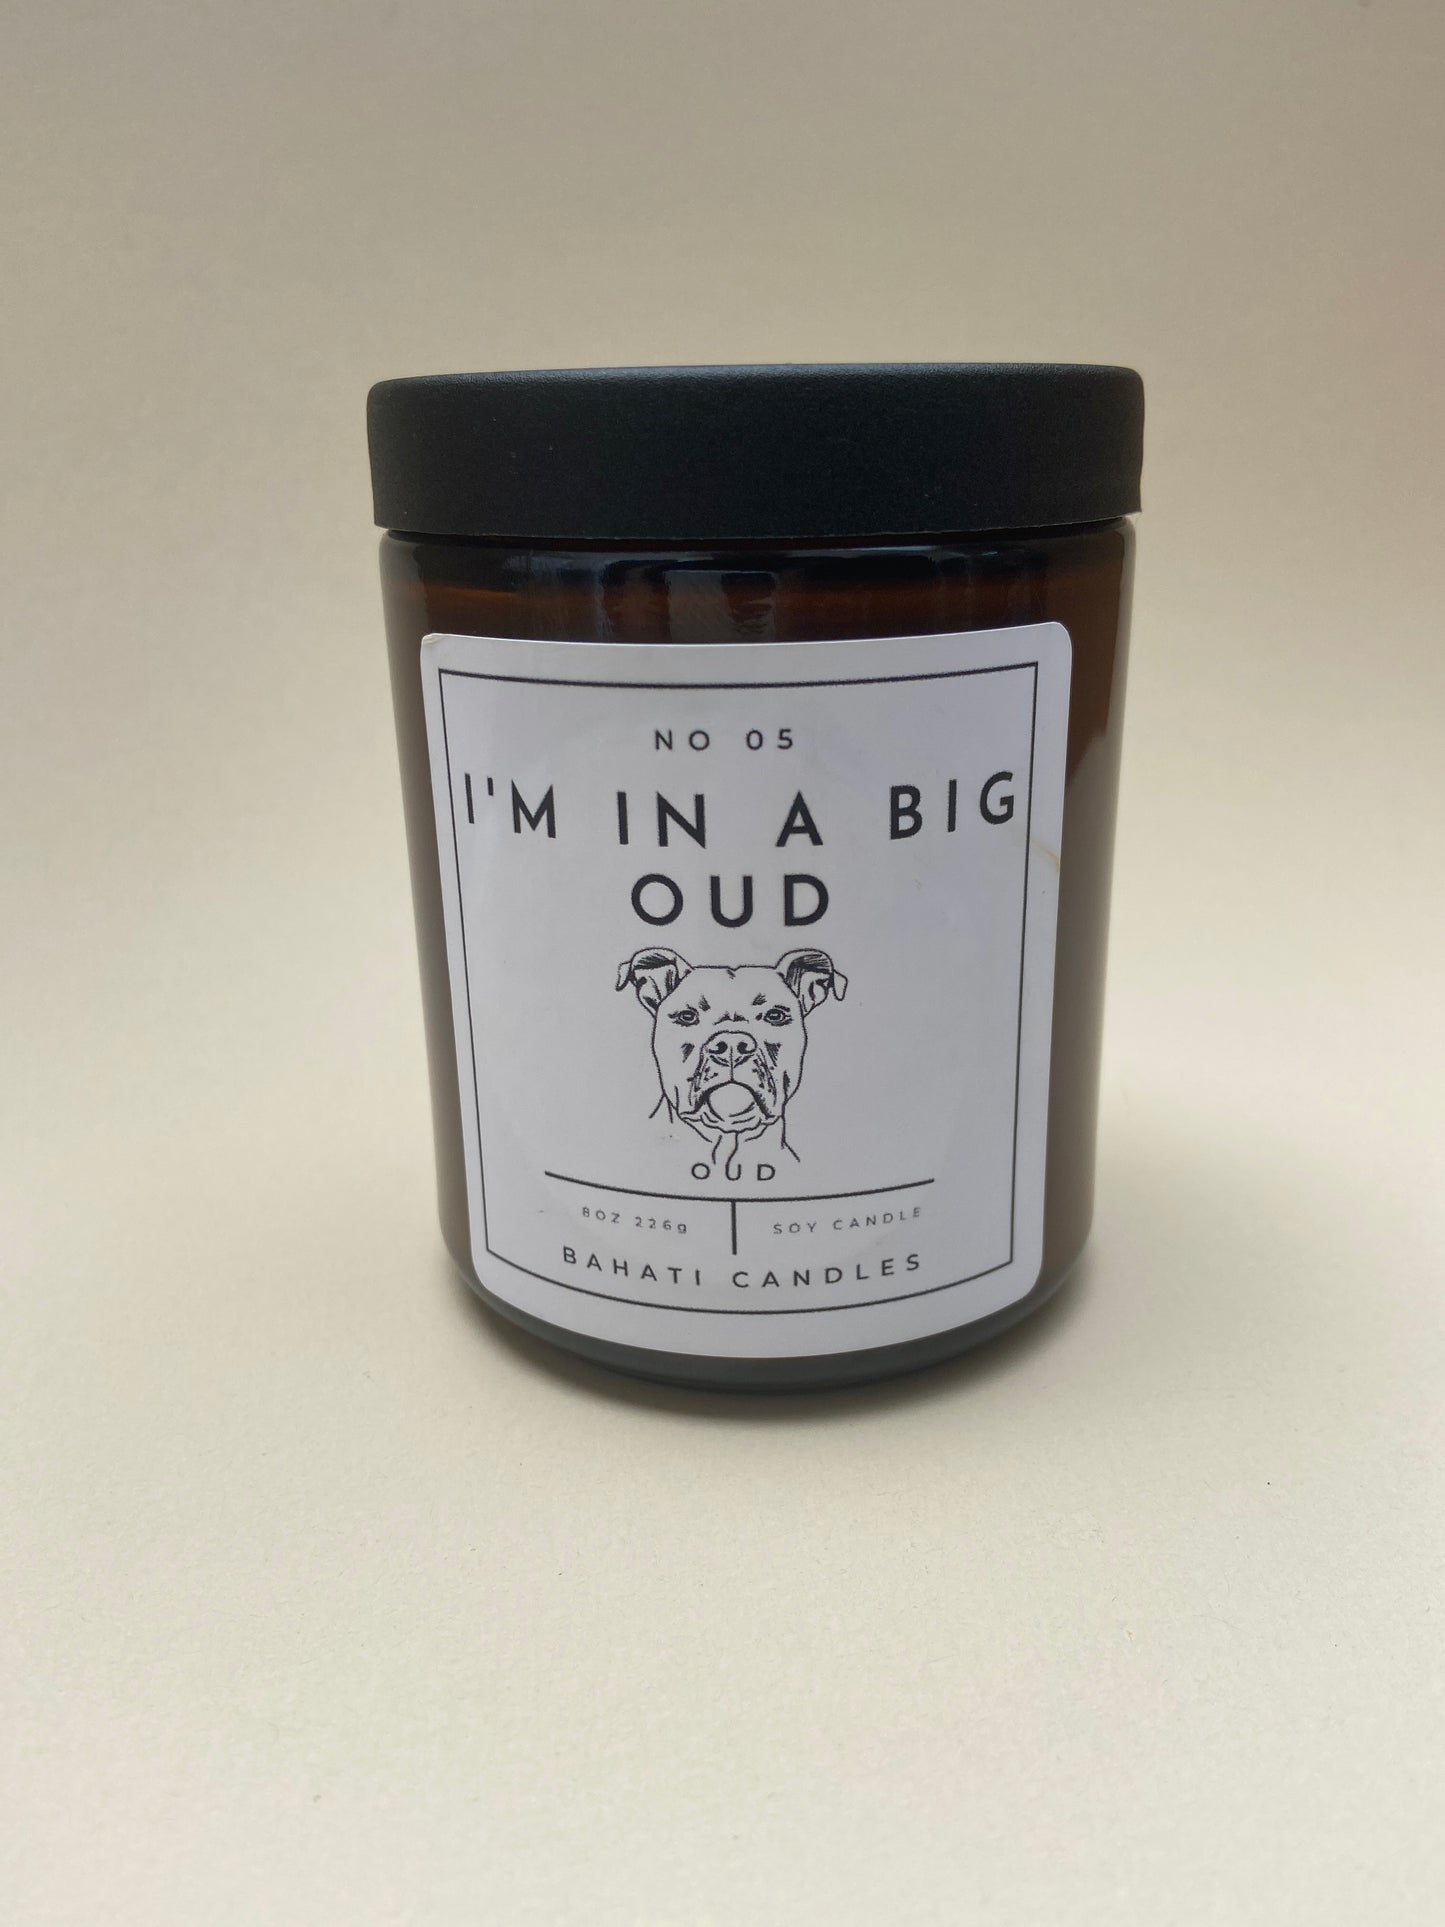 I'm in a big oud - 8 ounce candle